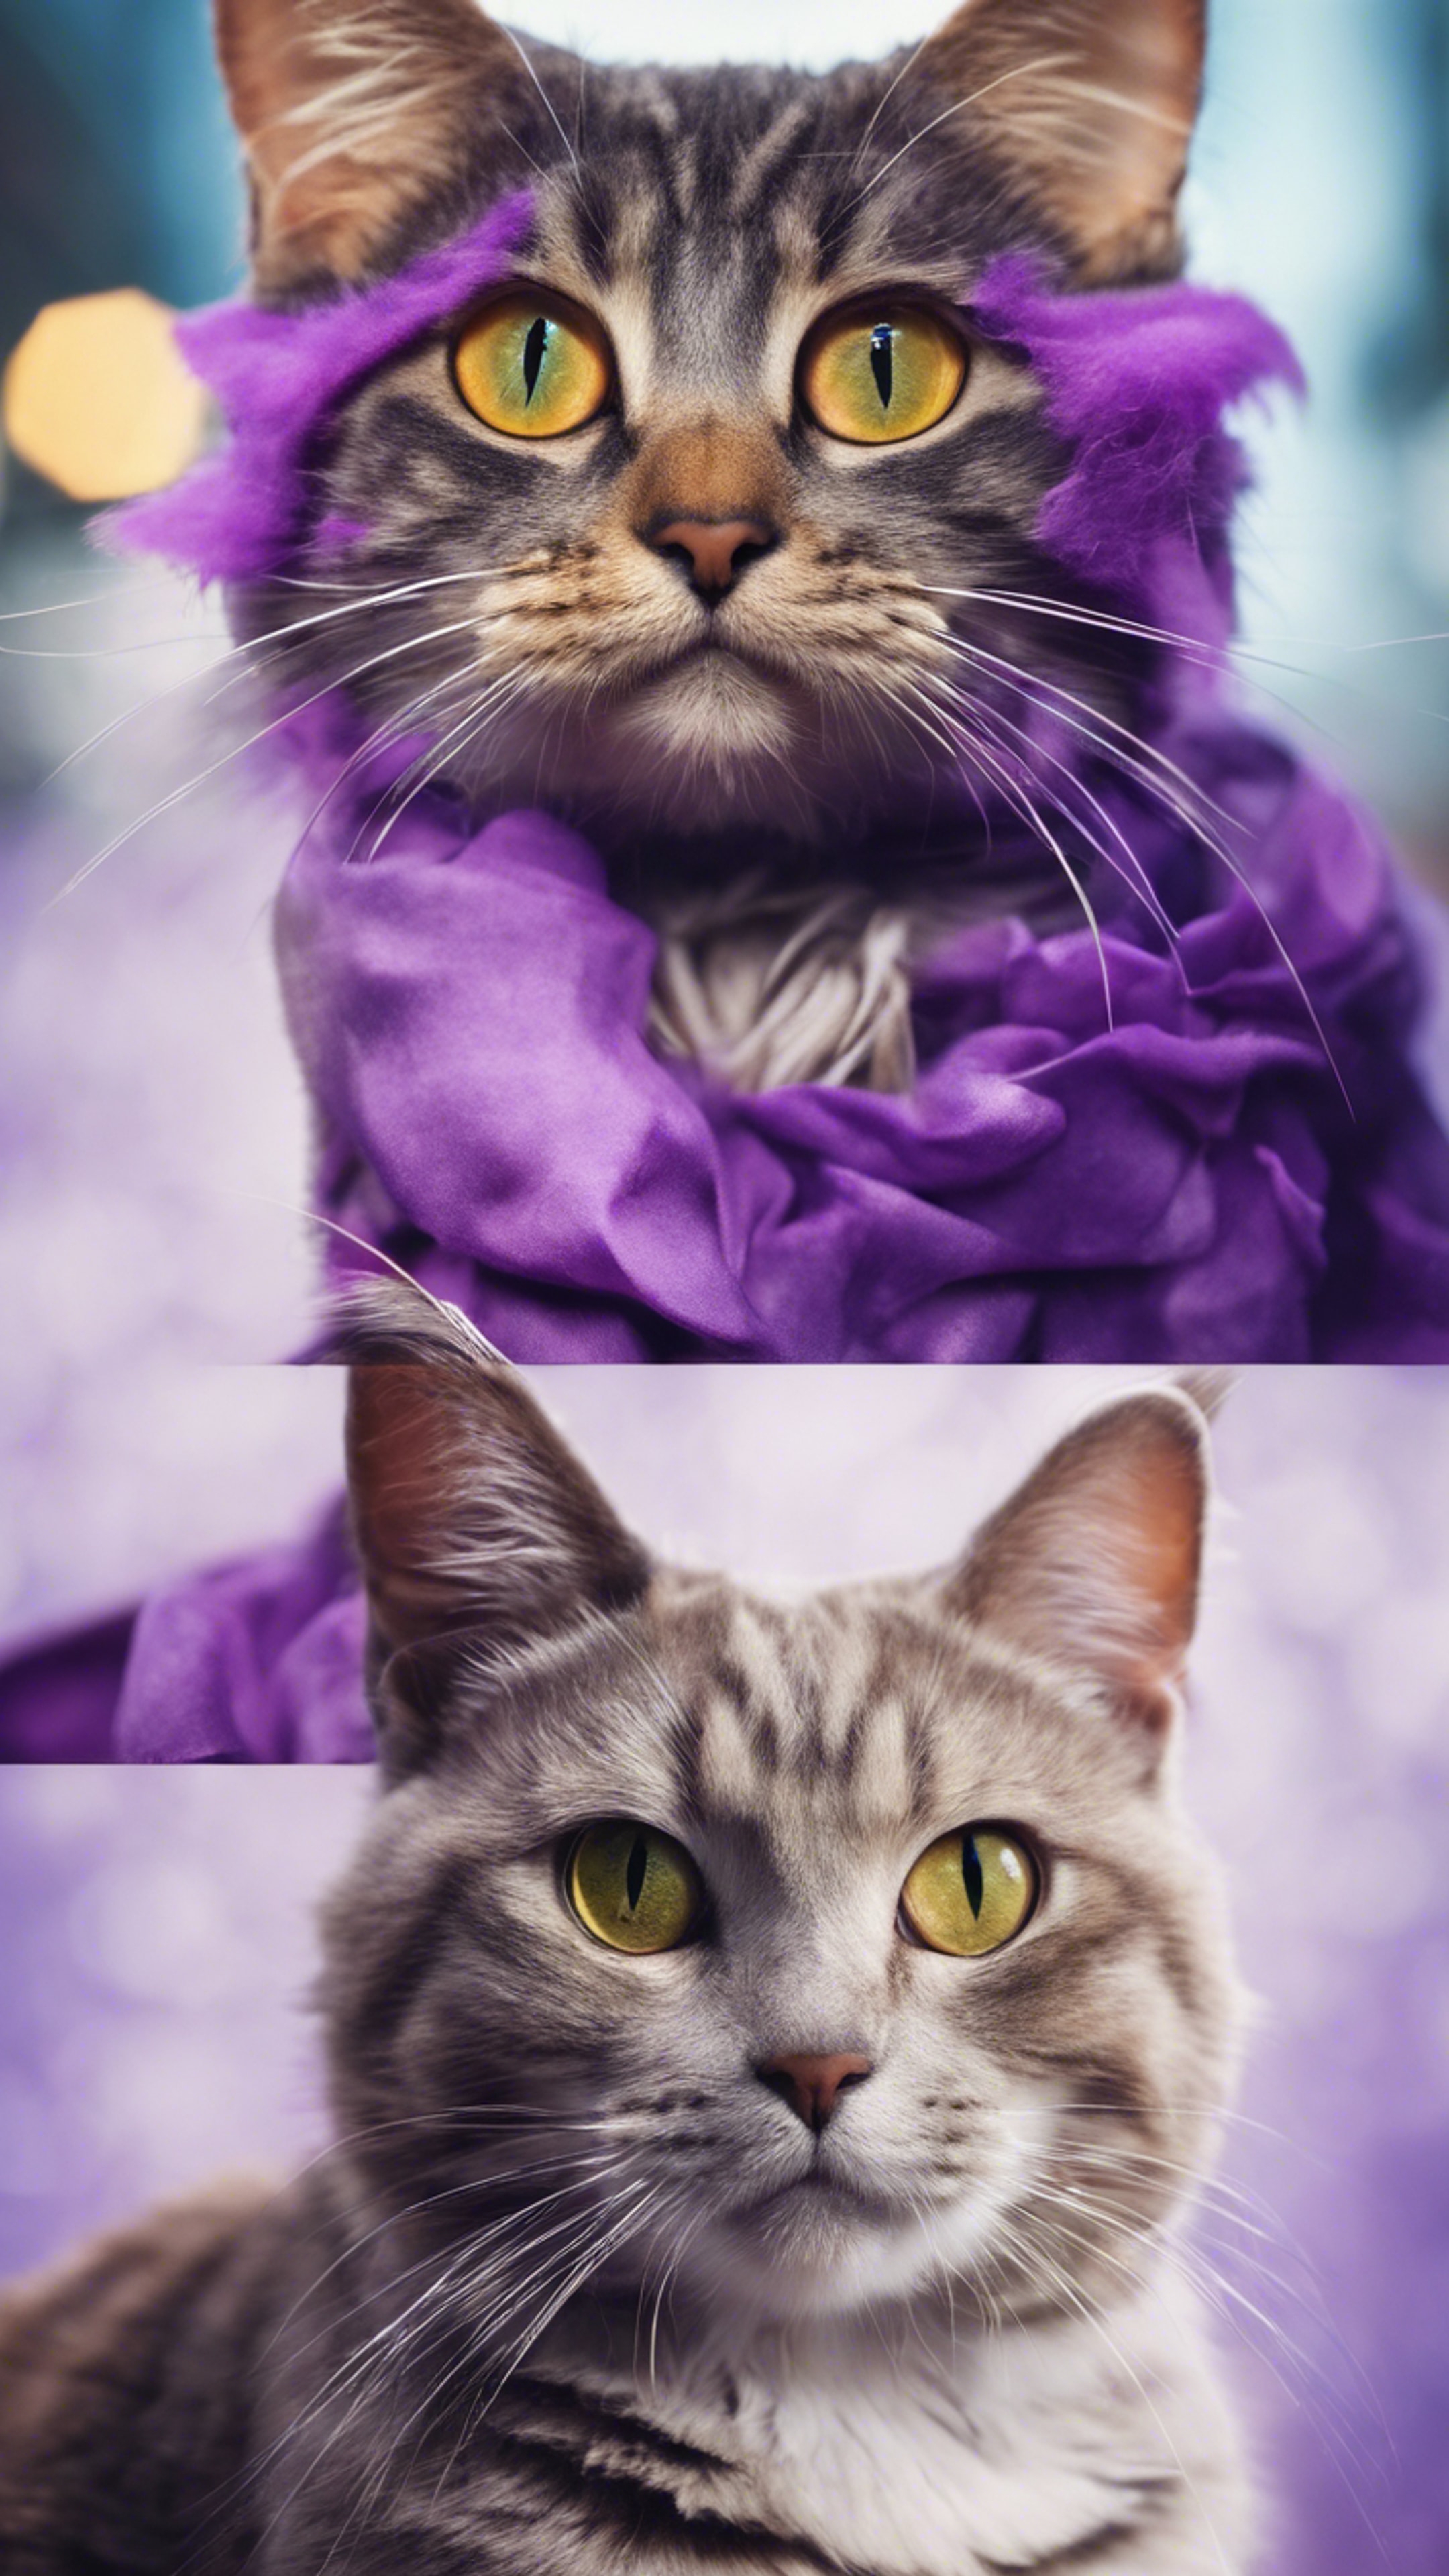 A playful collage showcasing various breeds of cats, all with unusual purple fur. Behang[3a46628192d3463088be]